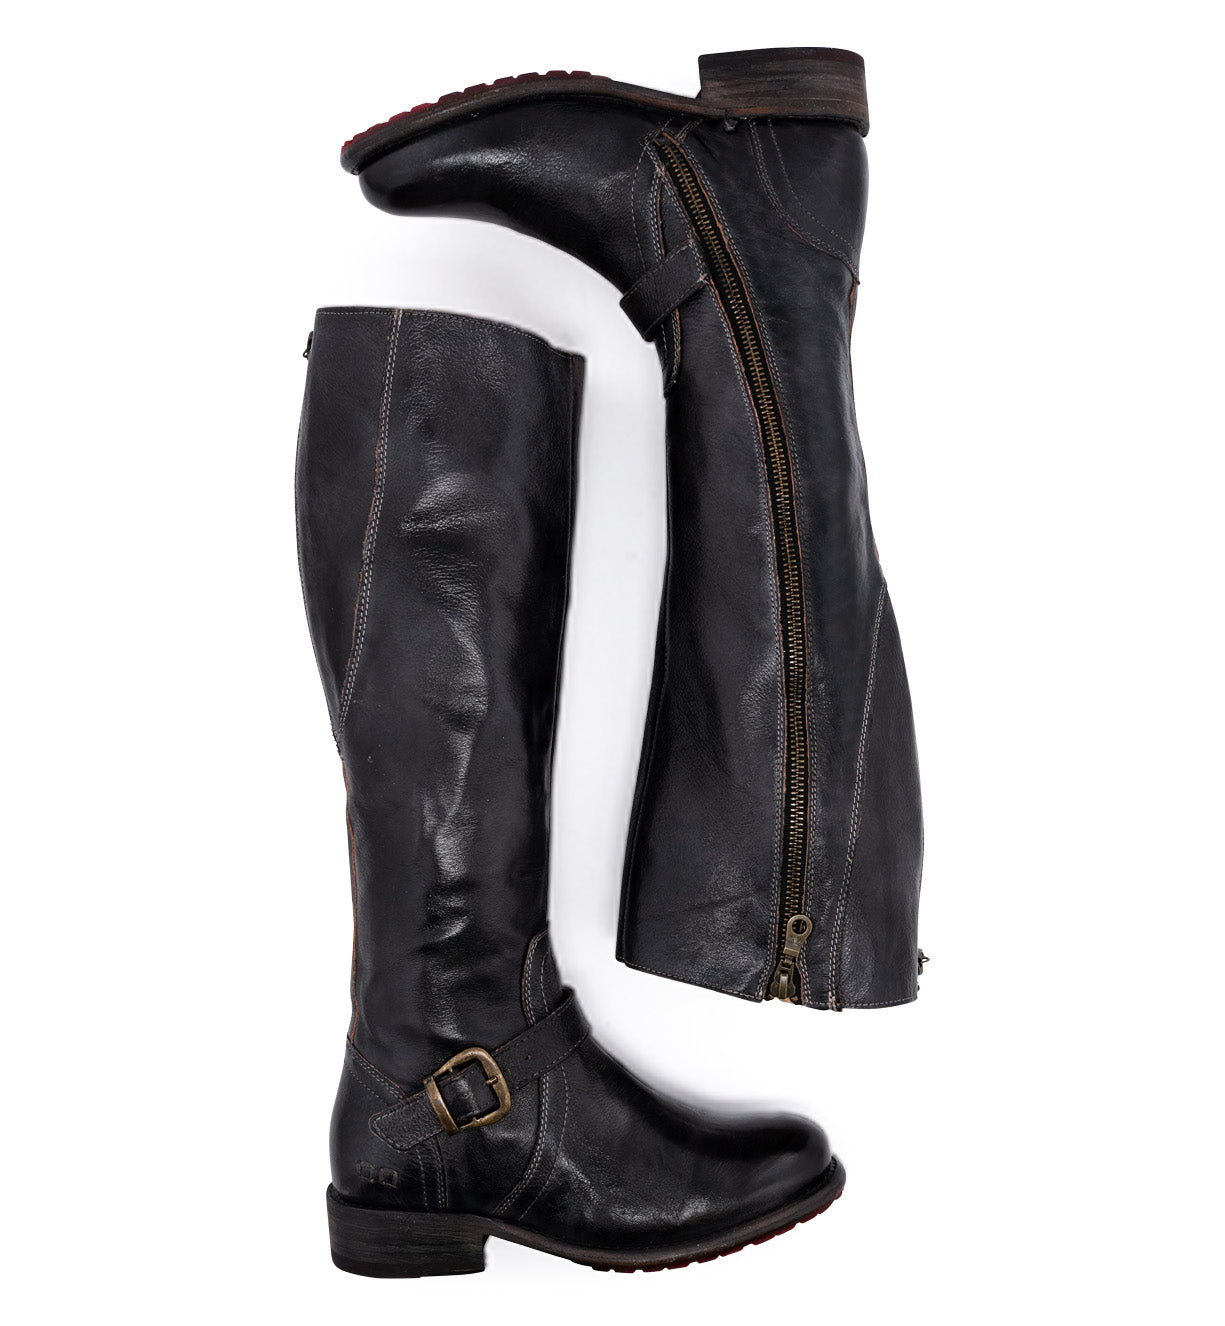 A pair of Bed Stu black leather Glaye boots with buckles and zippers.